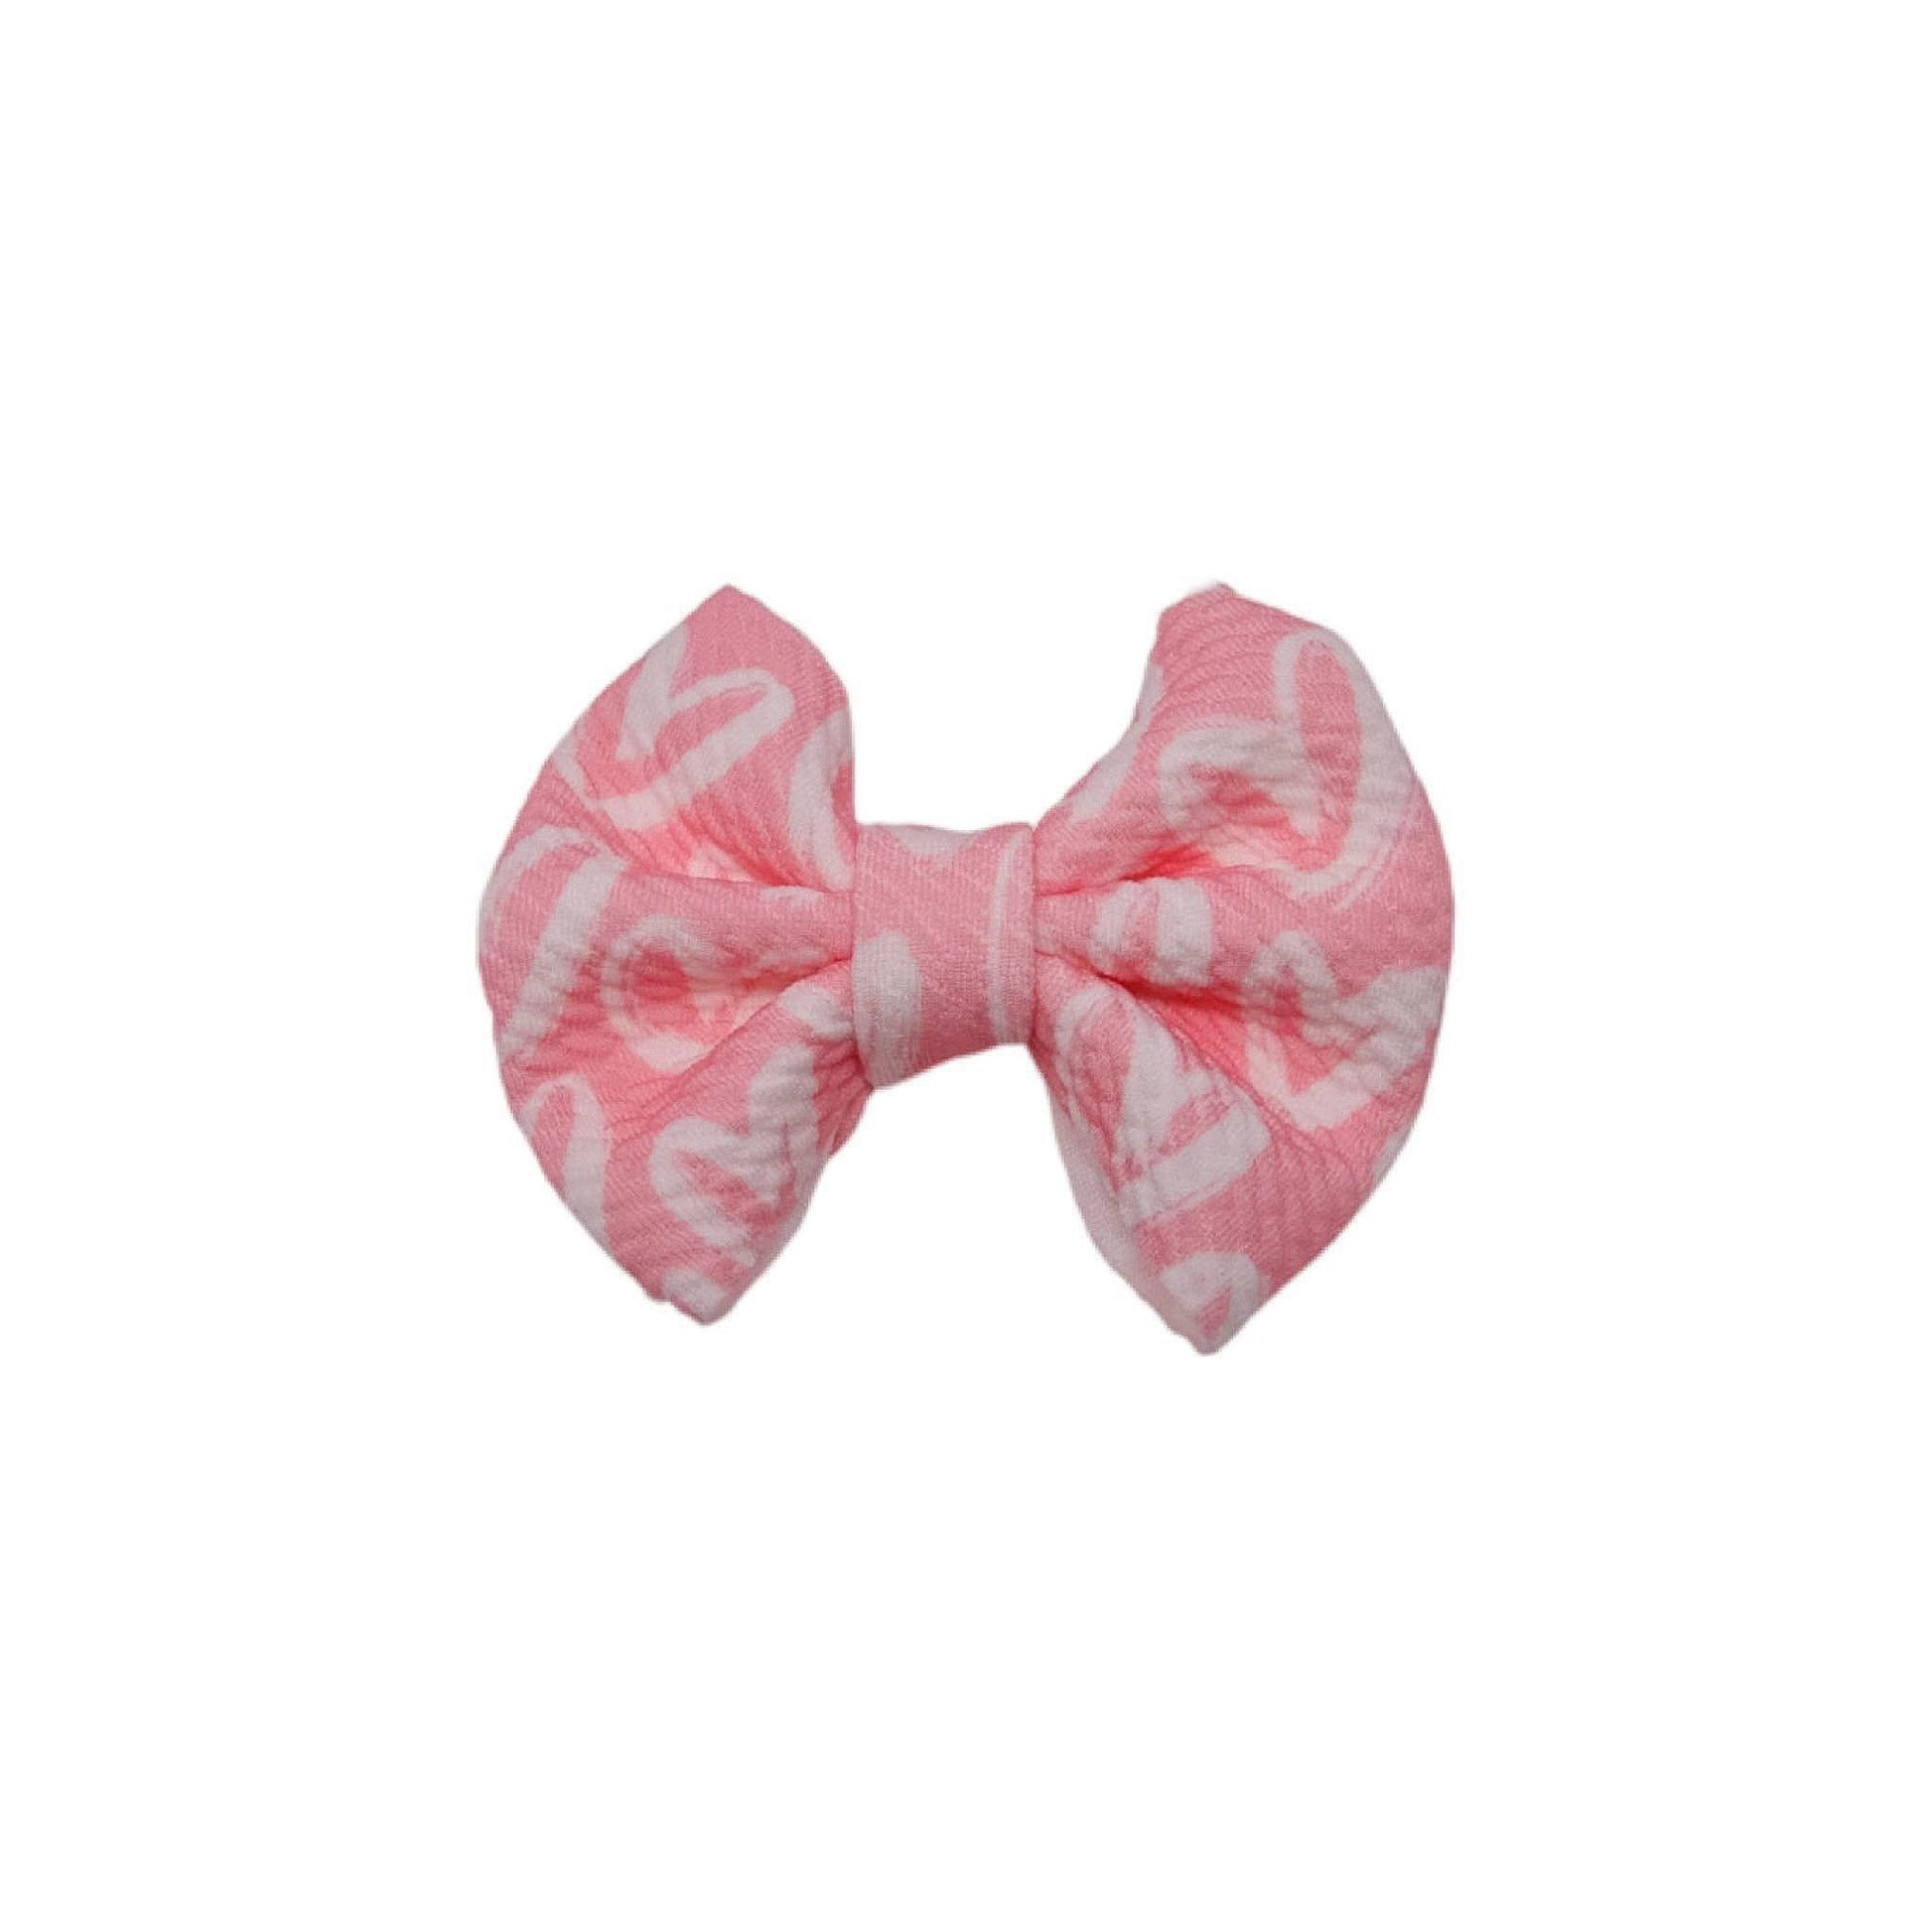 White Hearts on Pink Fabric Bow 3"